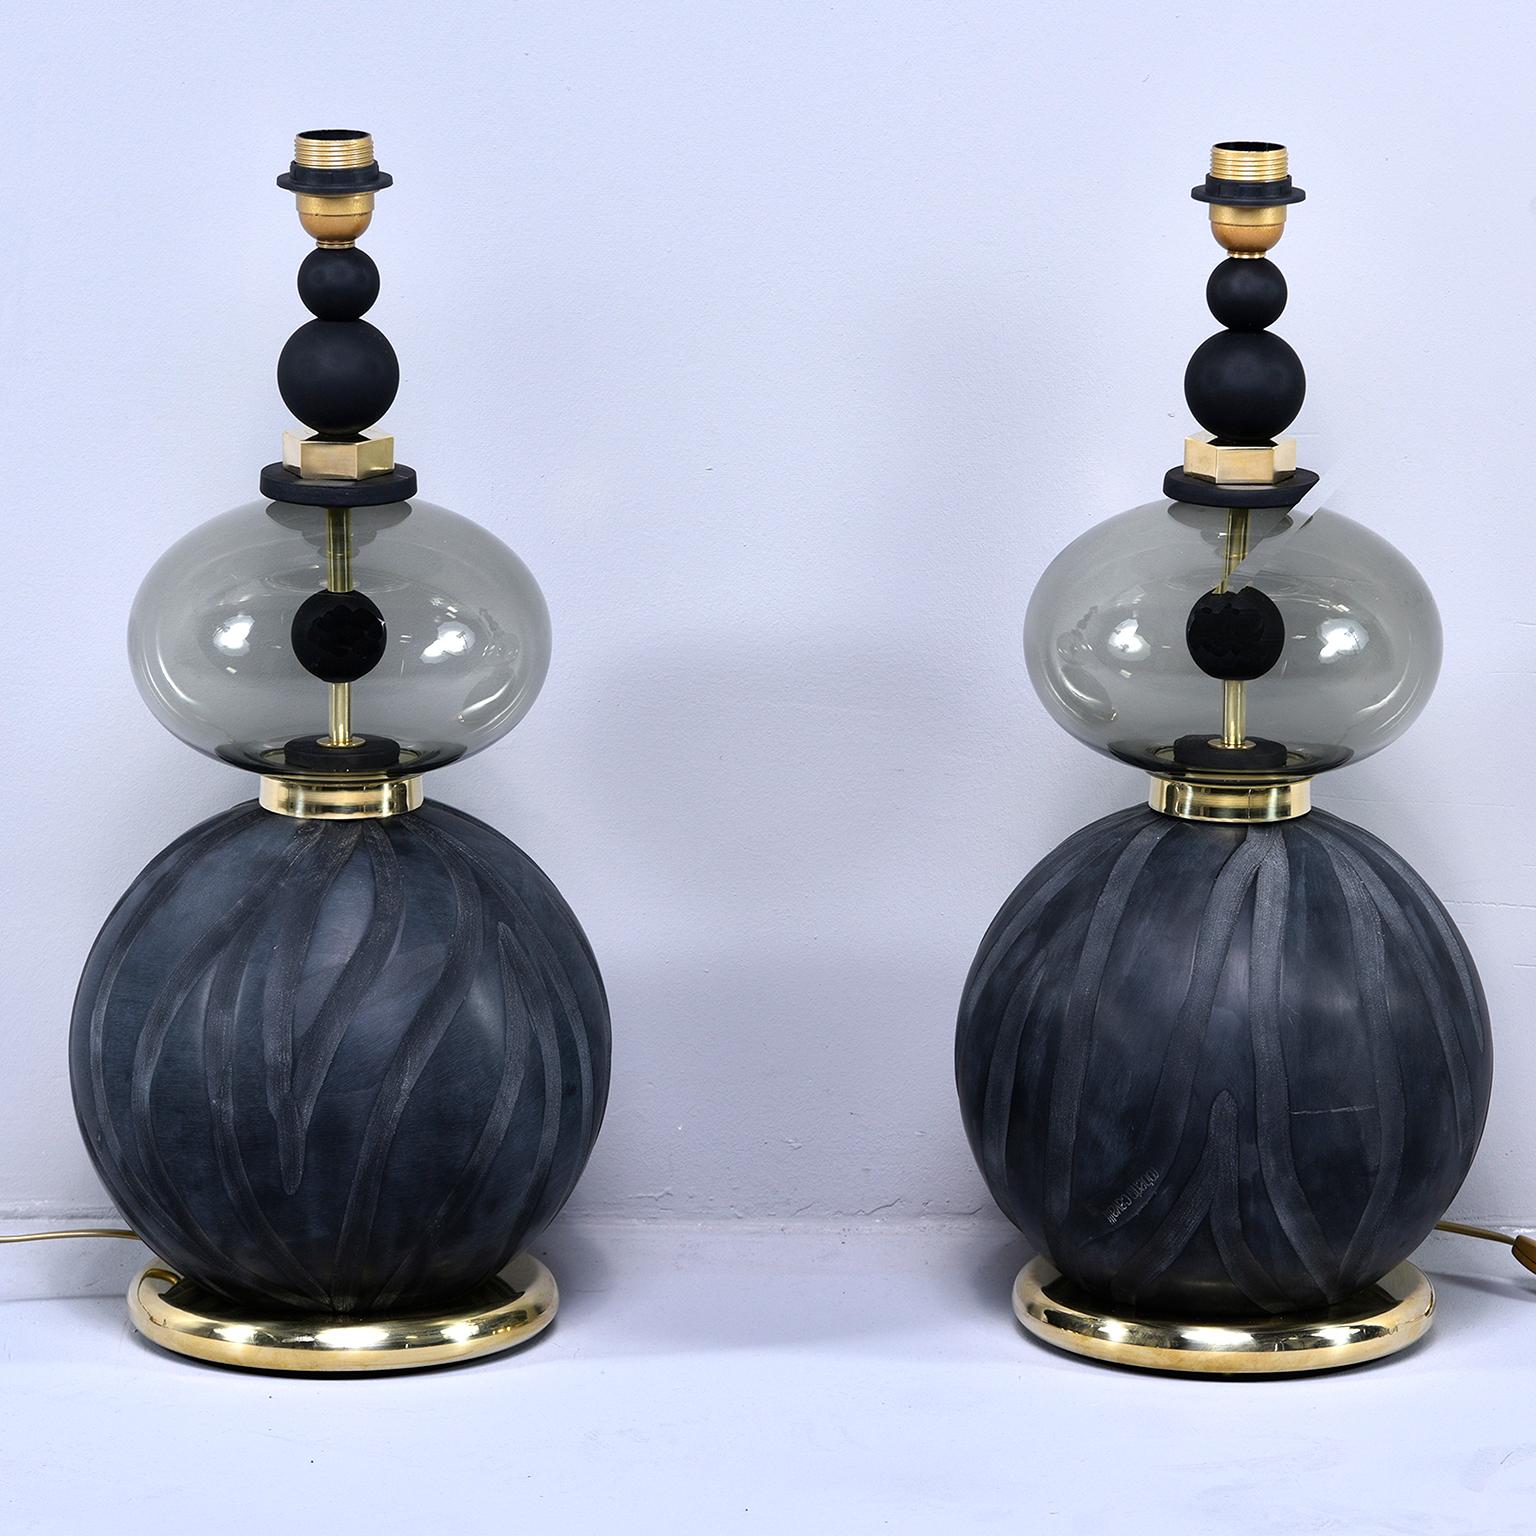 Pair of Signed Roberto Cavalli Black Double Vessel Art Glass Lamps 1